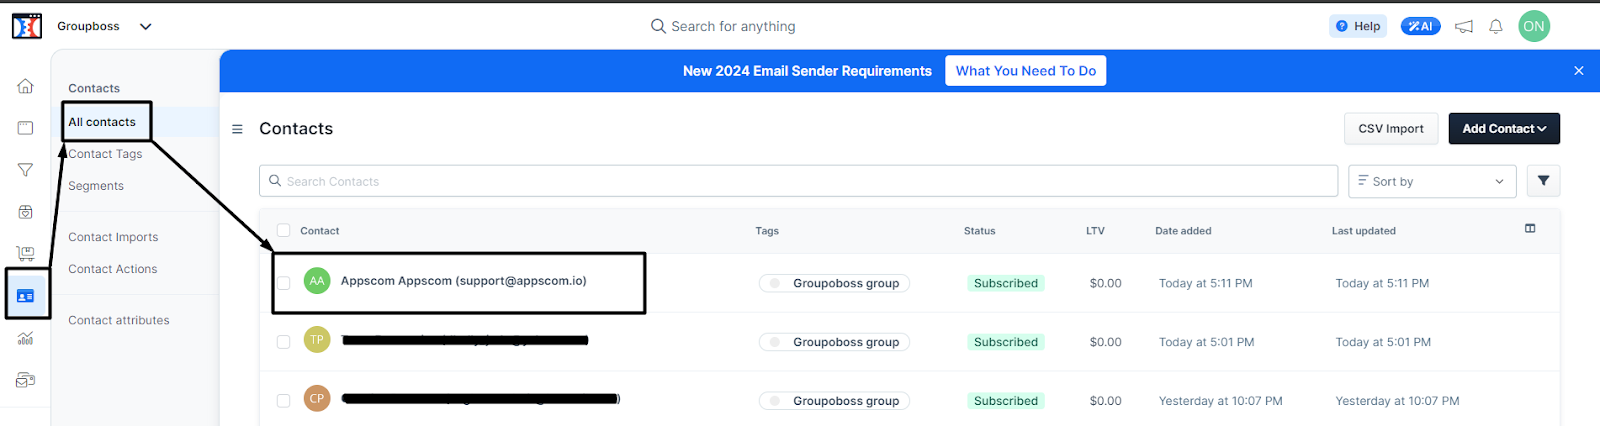 Emails inside Clickfunnels collected using Groupboss from Facebook group.